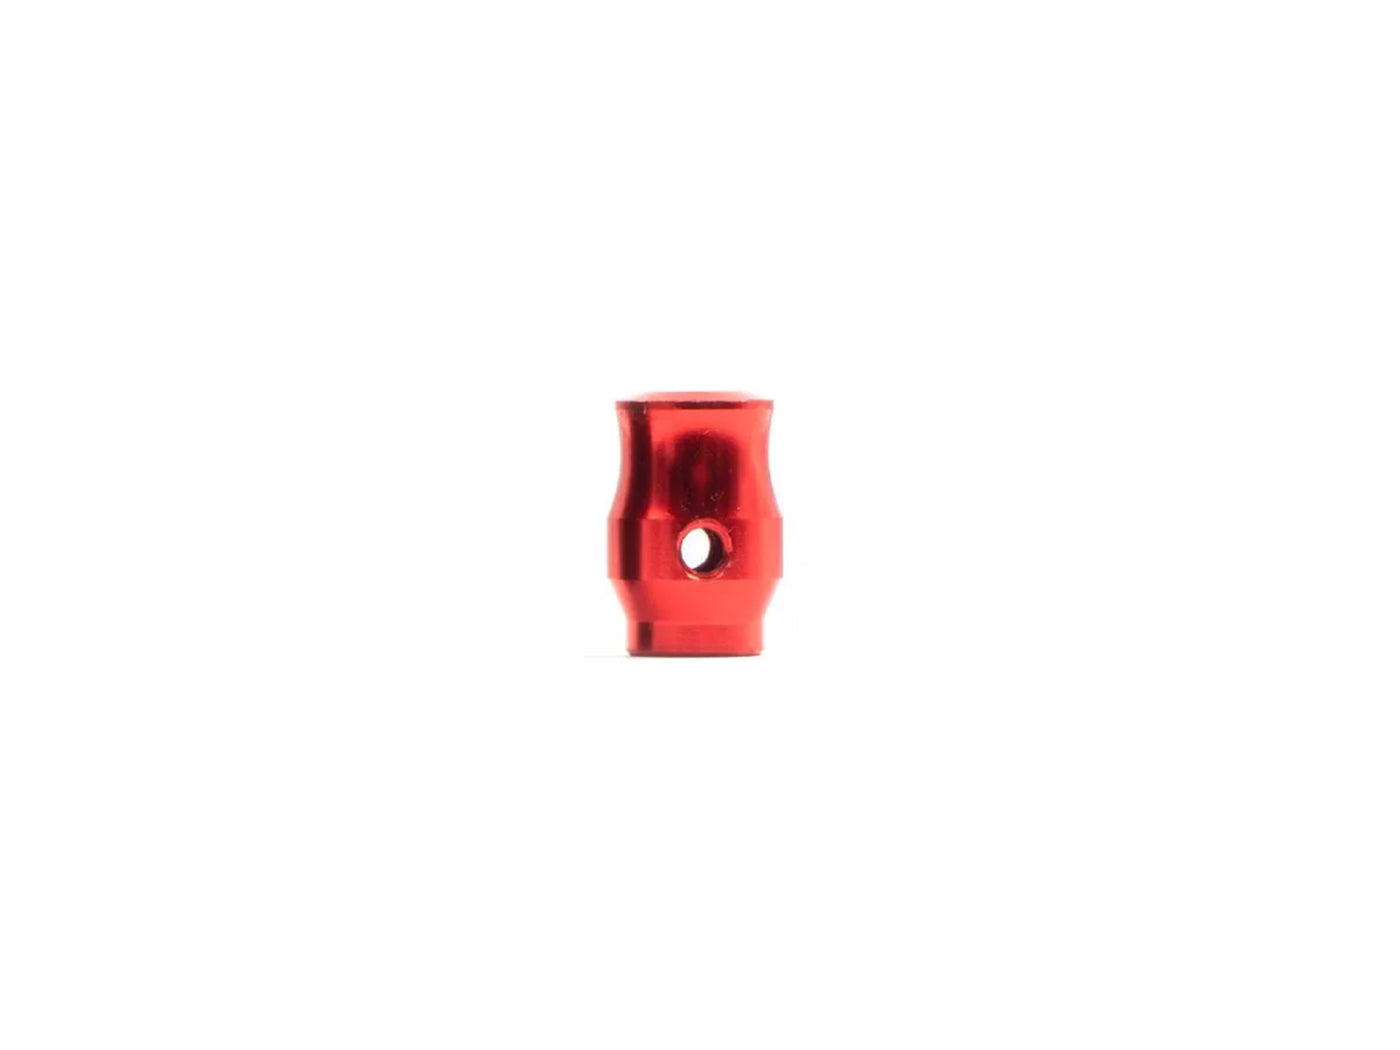 FrSky RED Metal Toggle Switch Cap for X18 Series, X20 Series, XE